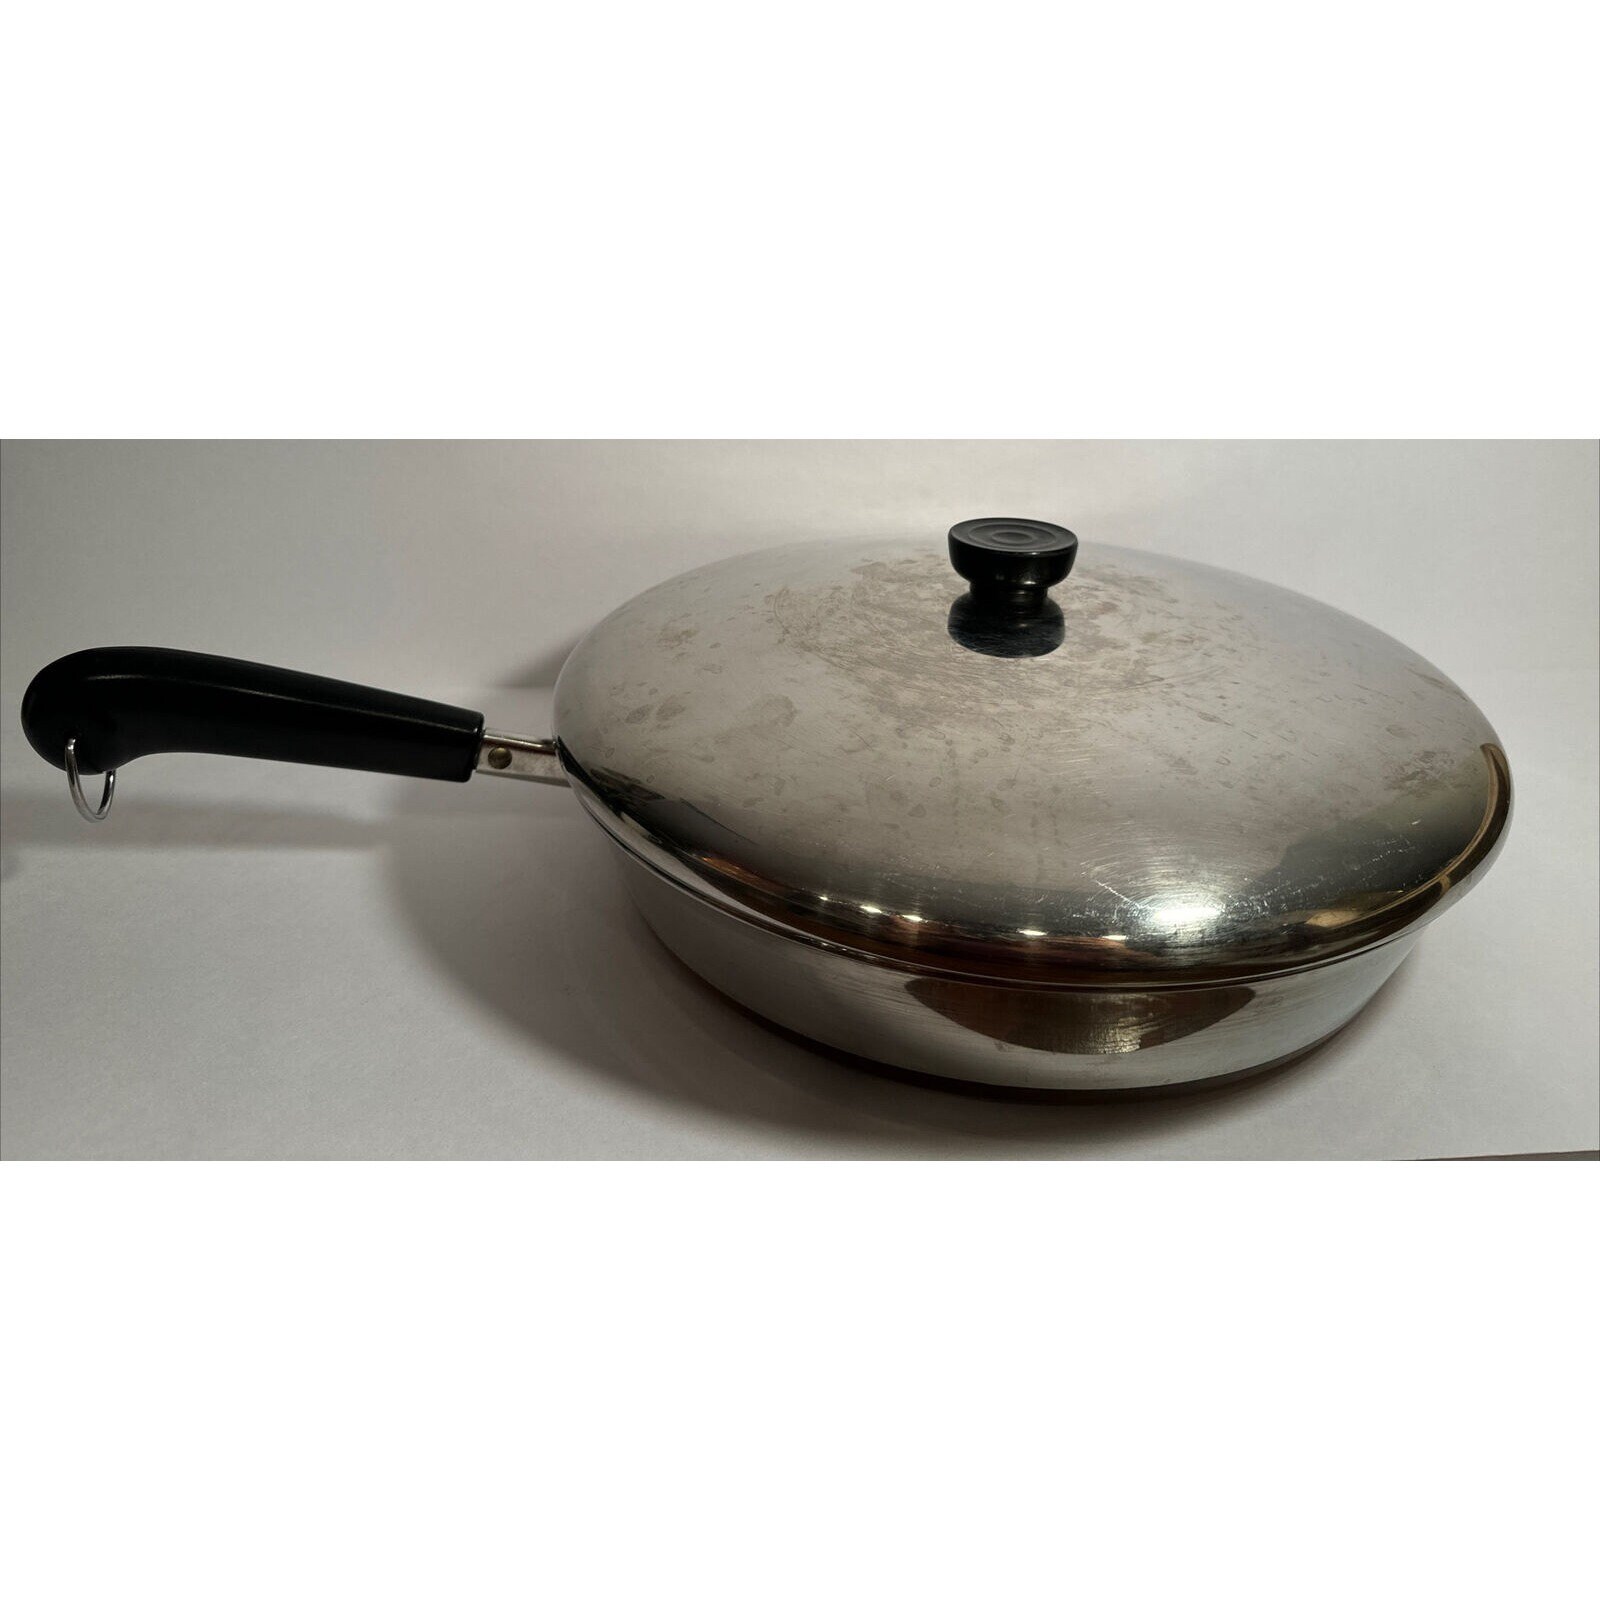 Revere Ware 12 Inch Skillet Fry Pan Tri-Ply Disc Bottom Lid Stainless Steel